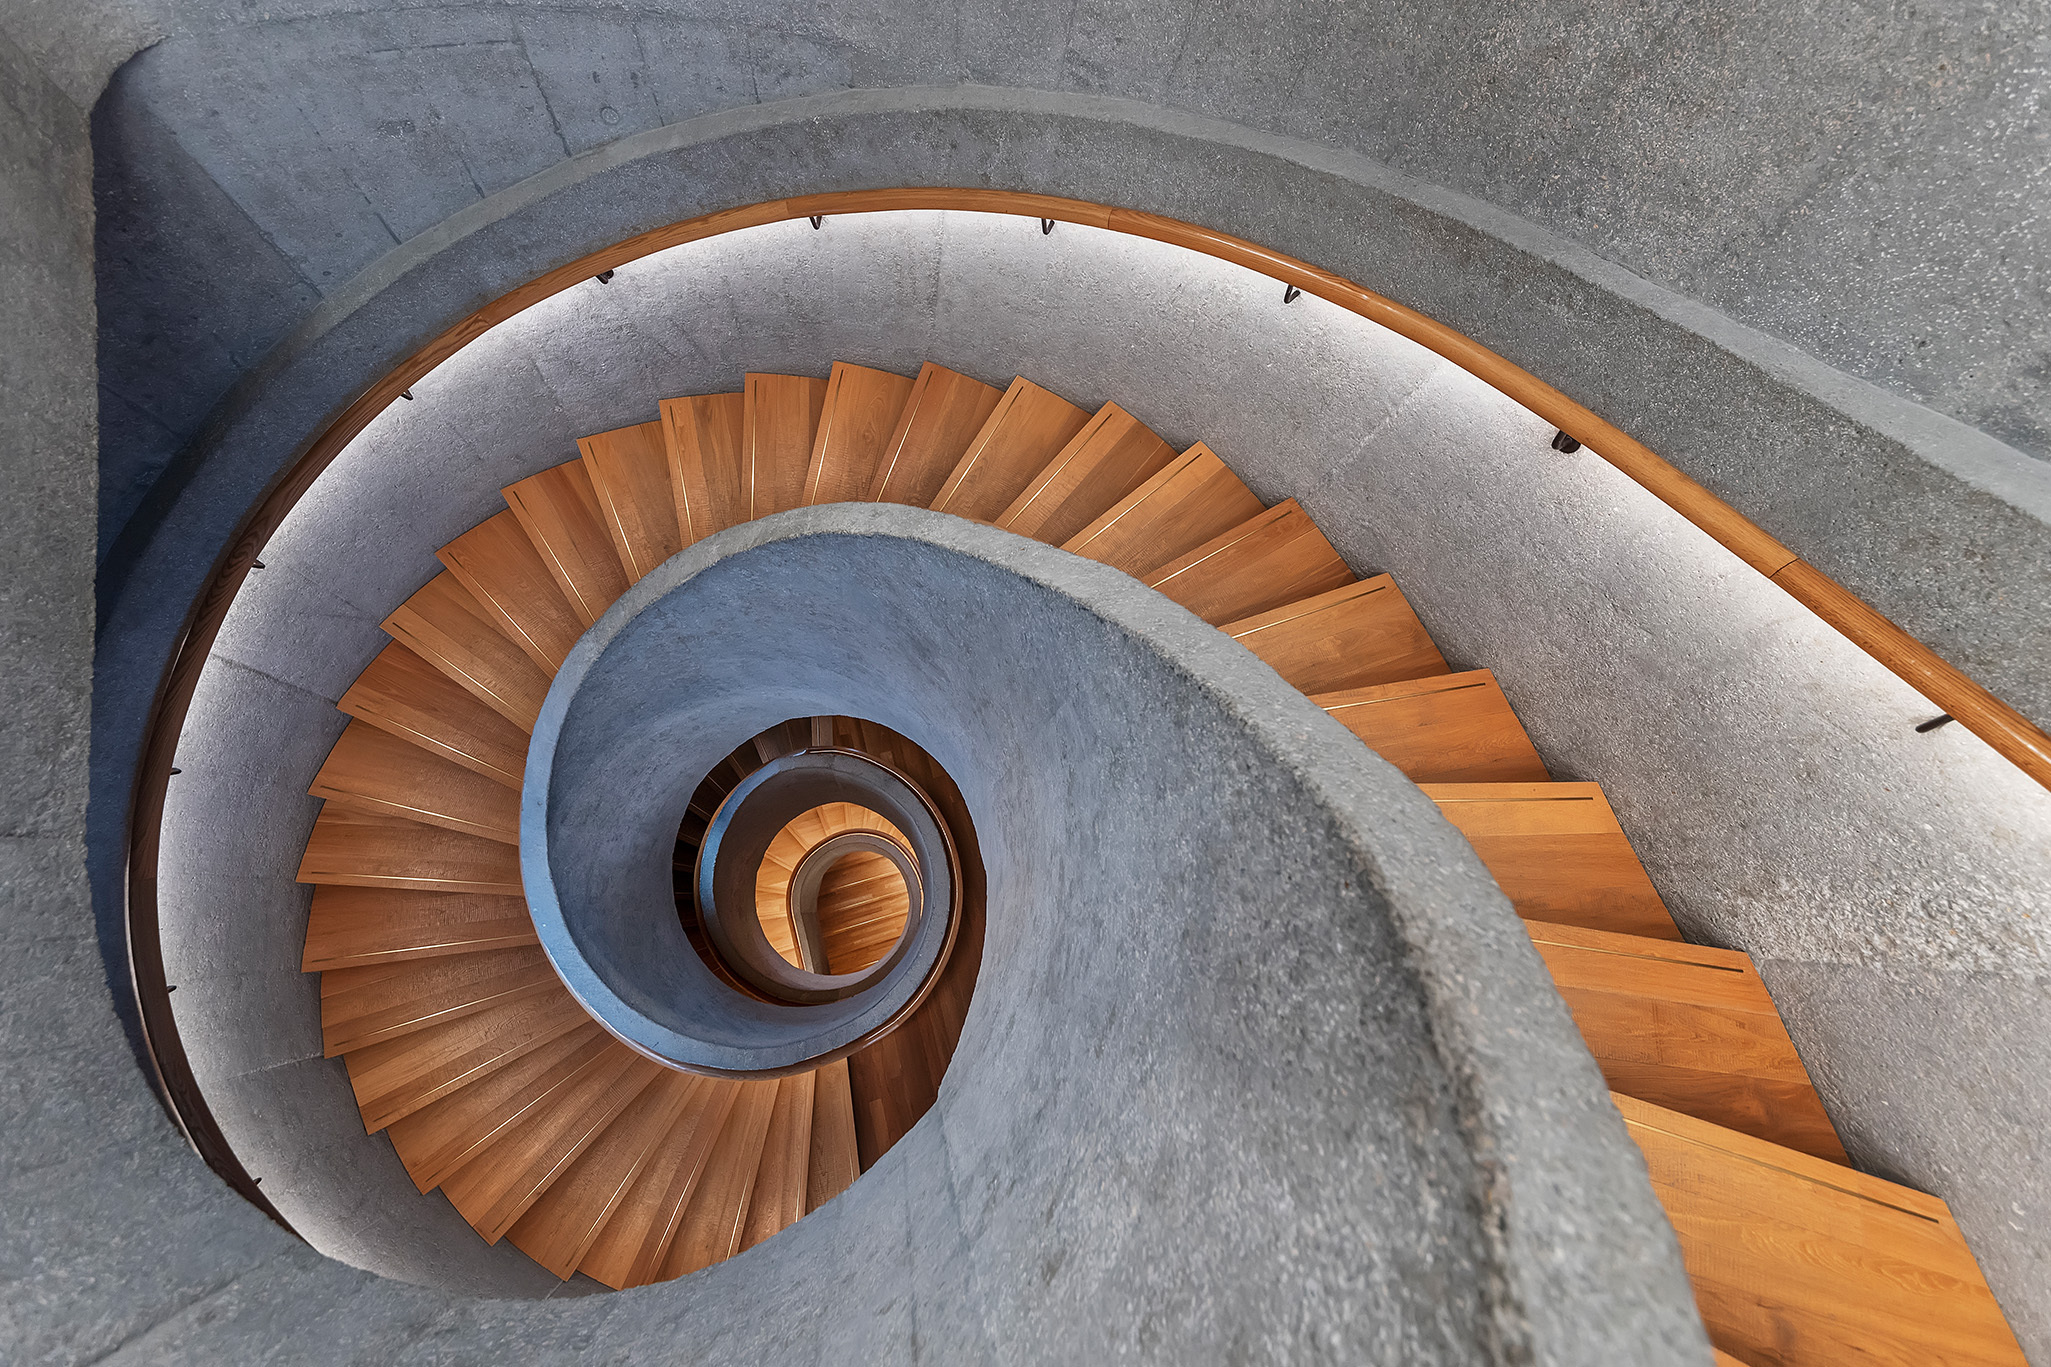 A wooden spiral staircase